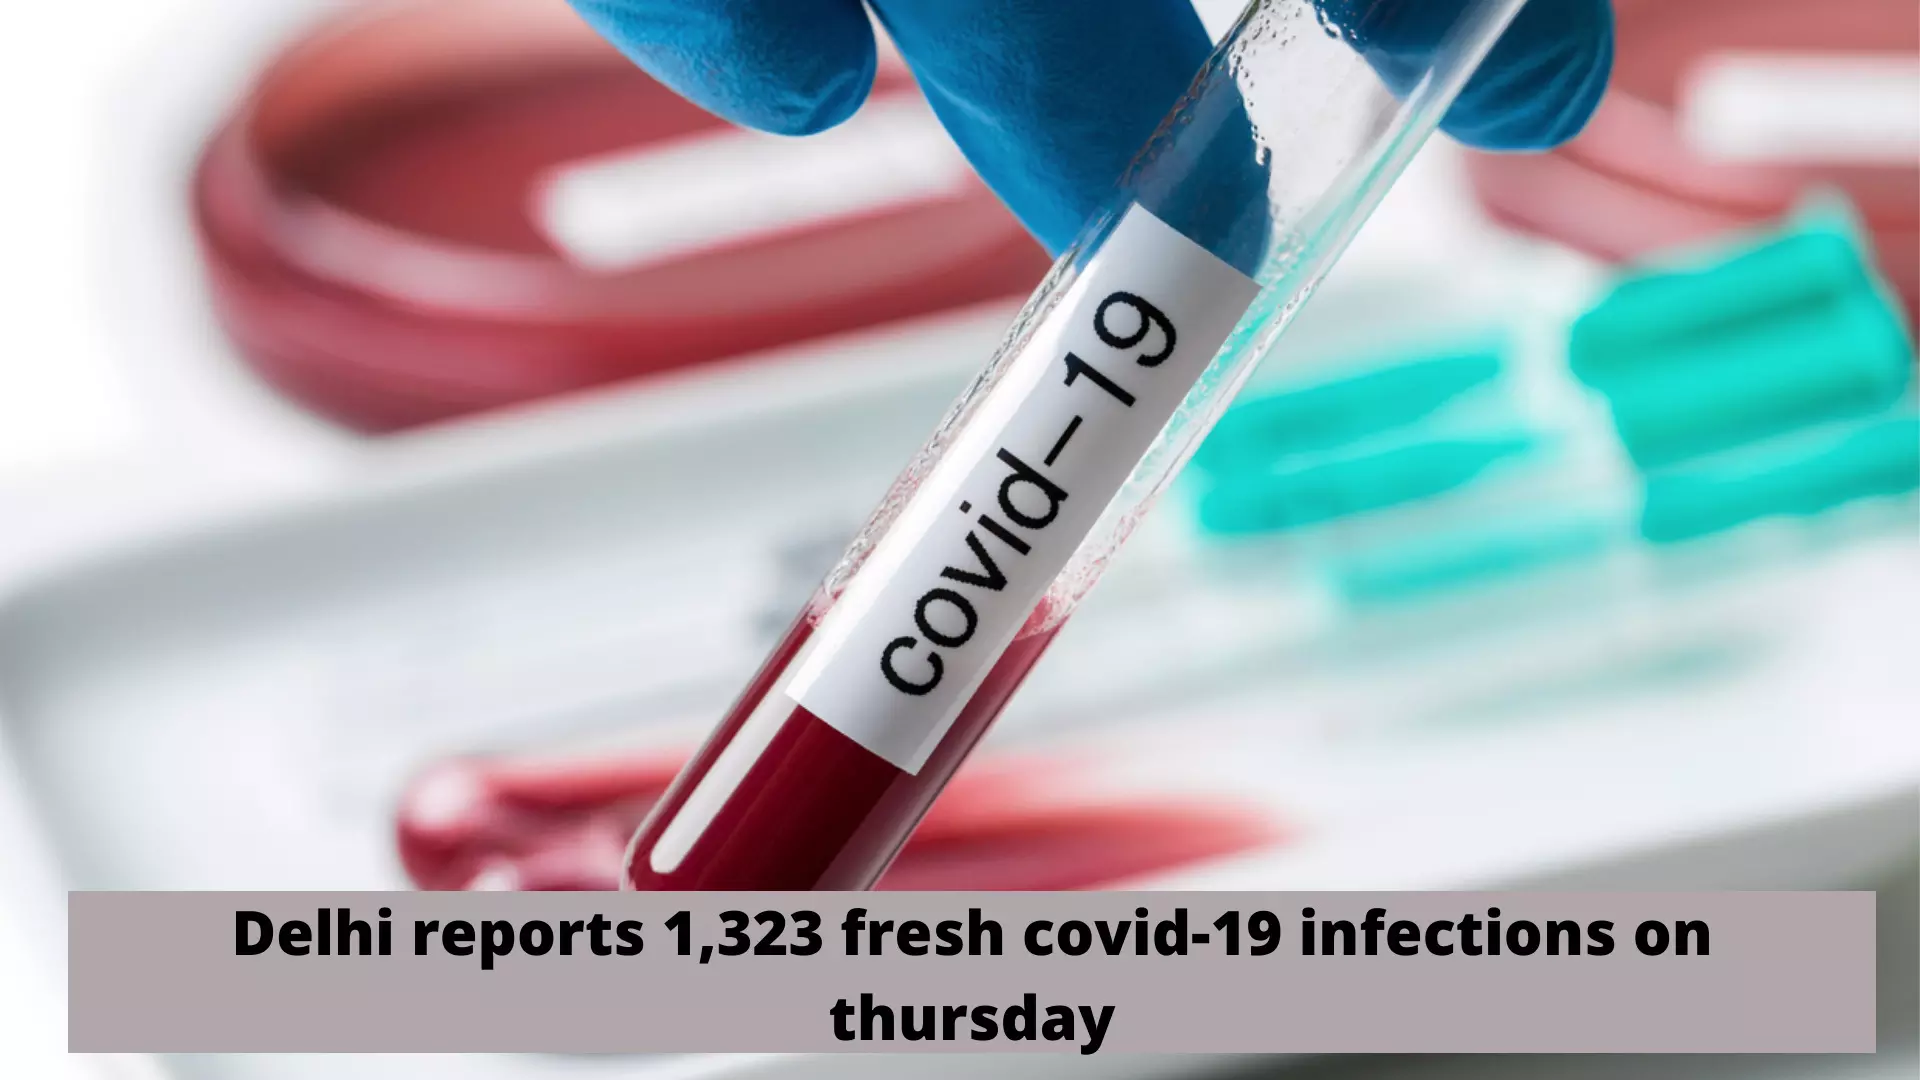 Delhi reports 1,323 fresh covid-19 infections on Thursday